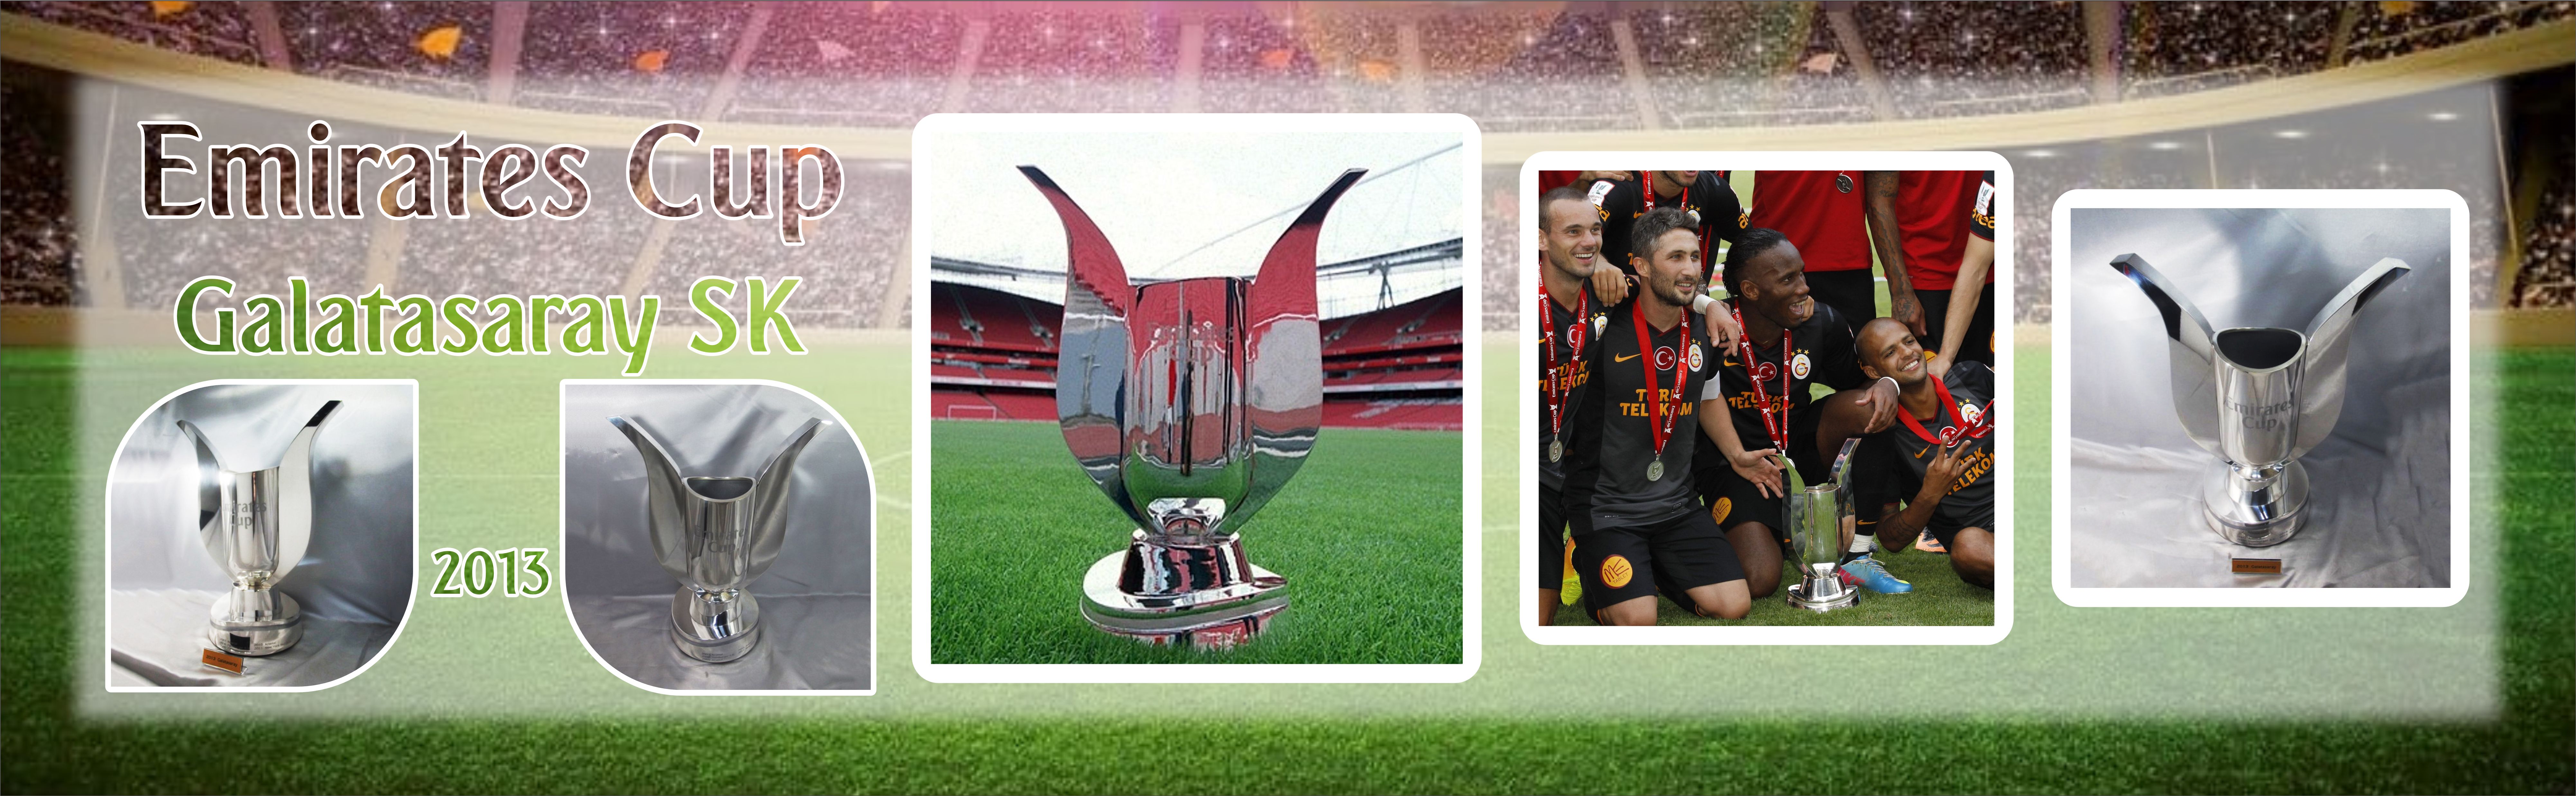 Emirates Cup Galatasaray SK 2013